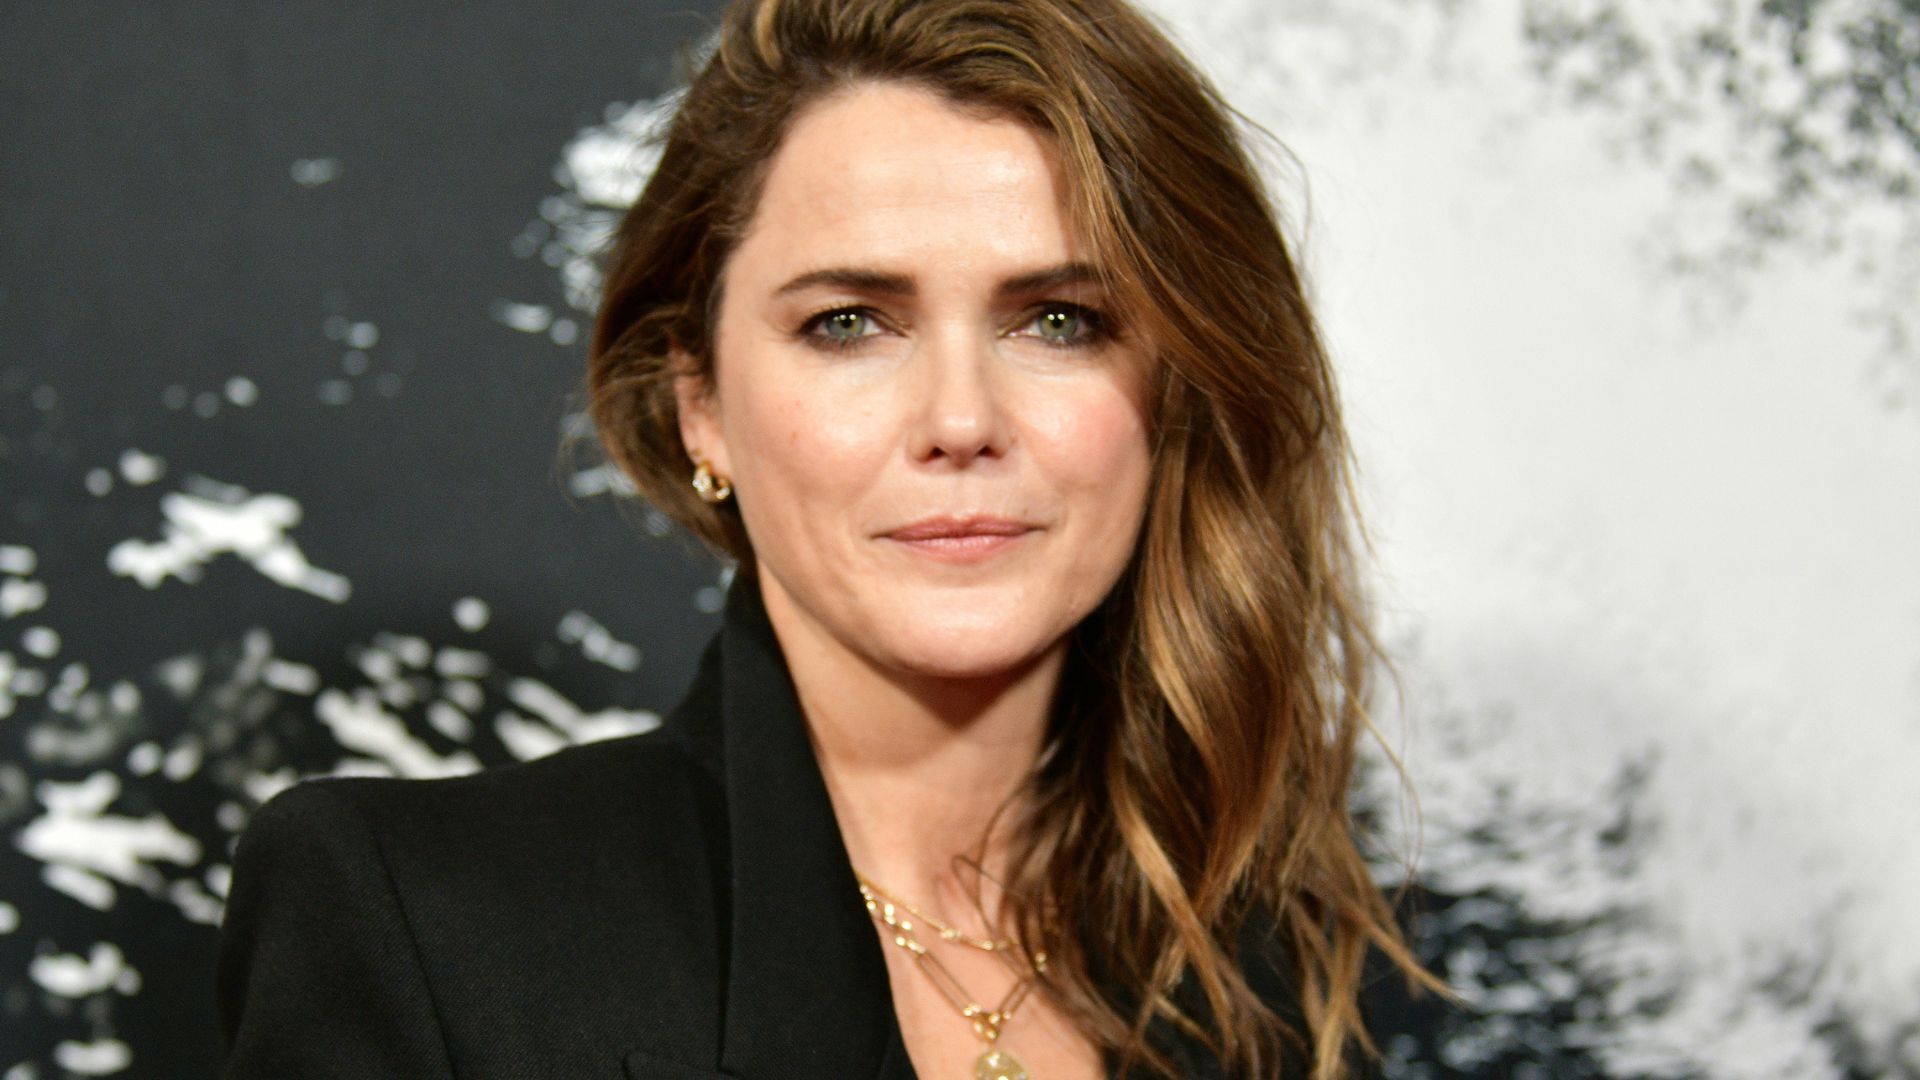 Keri Russell Wearing Black Coat And Golden Necklace